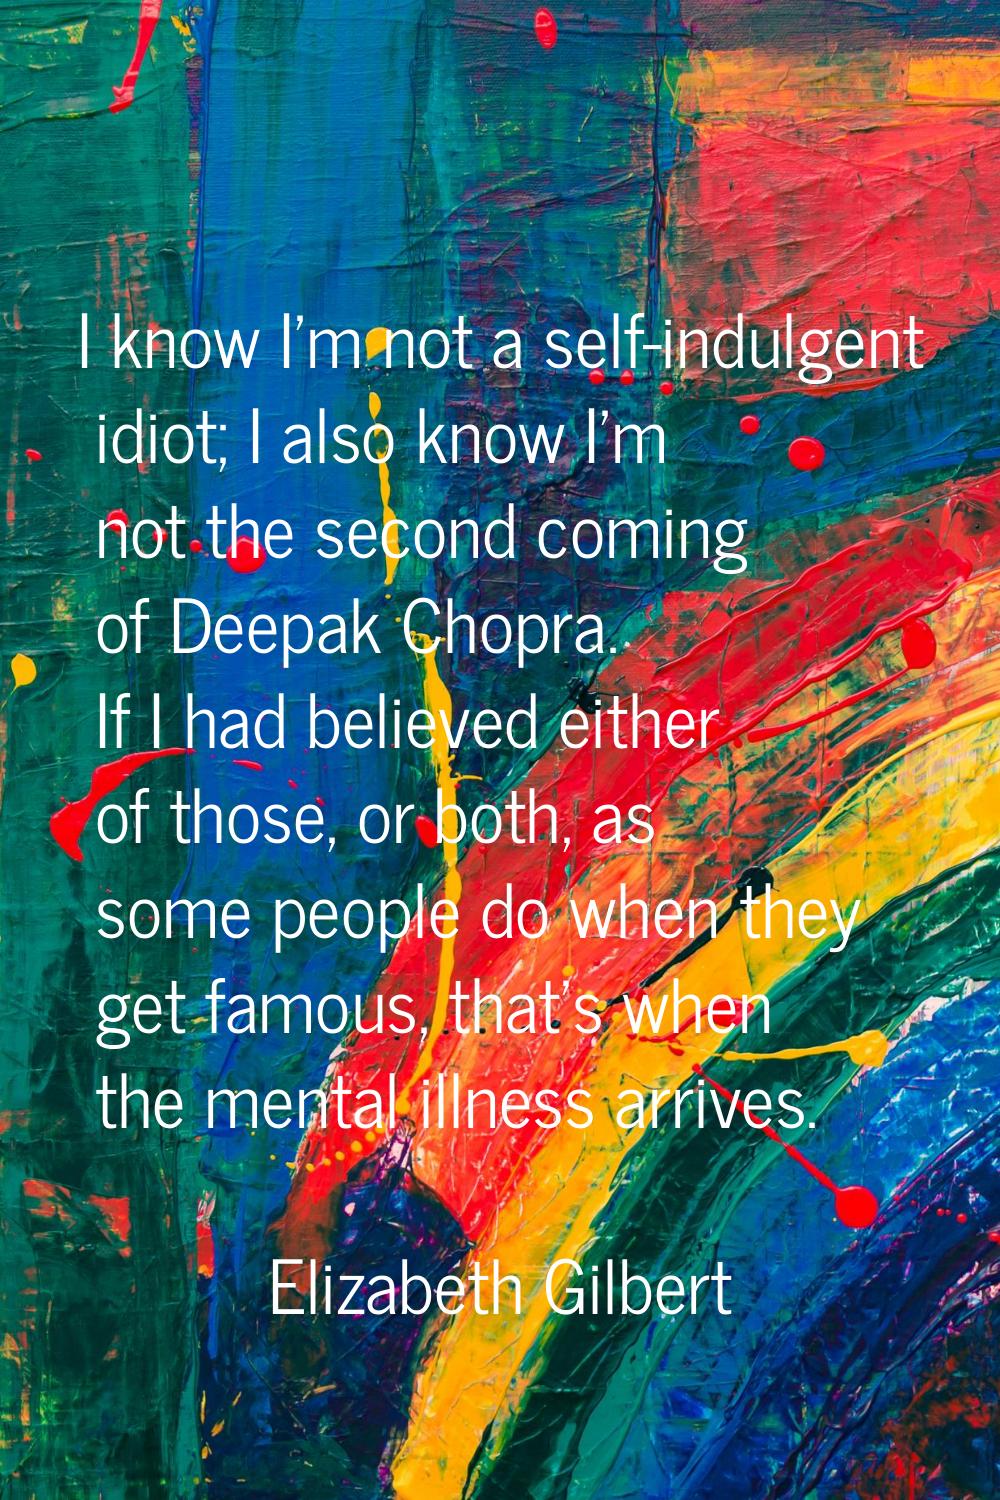 I know I'm not a self-indulgent idiot; I also know I'm not the second coming of Deepak Chopra. If I